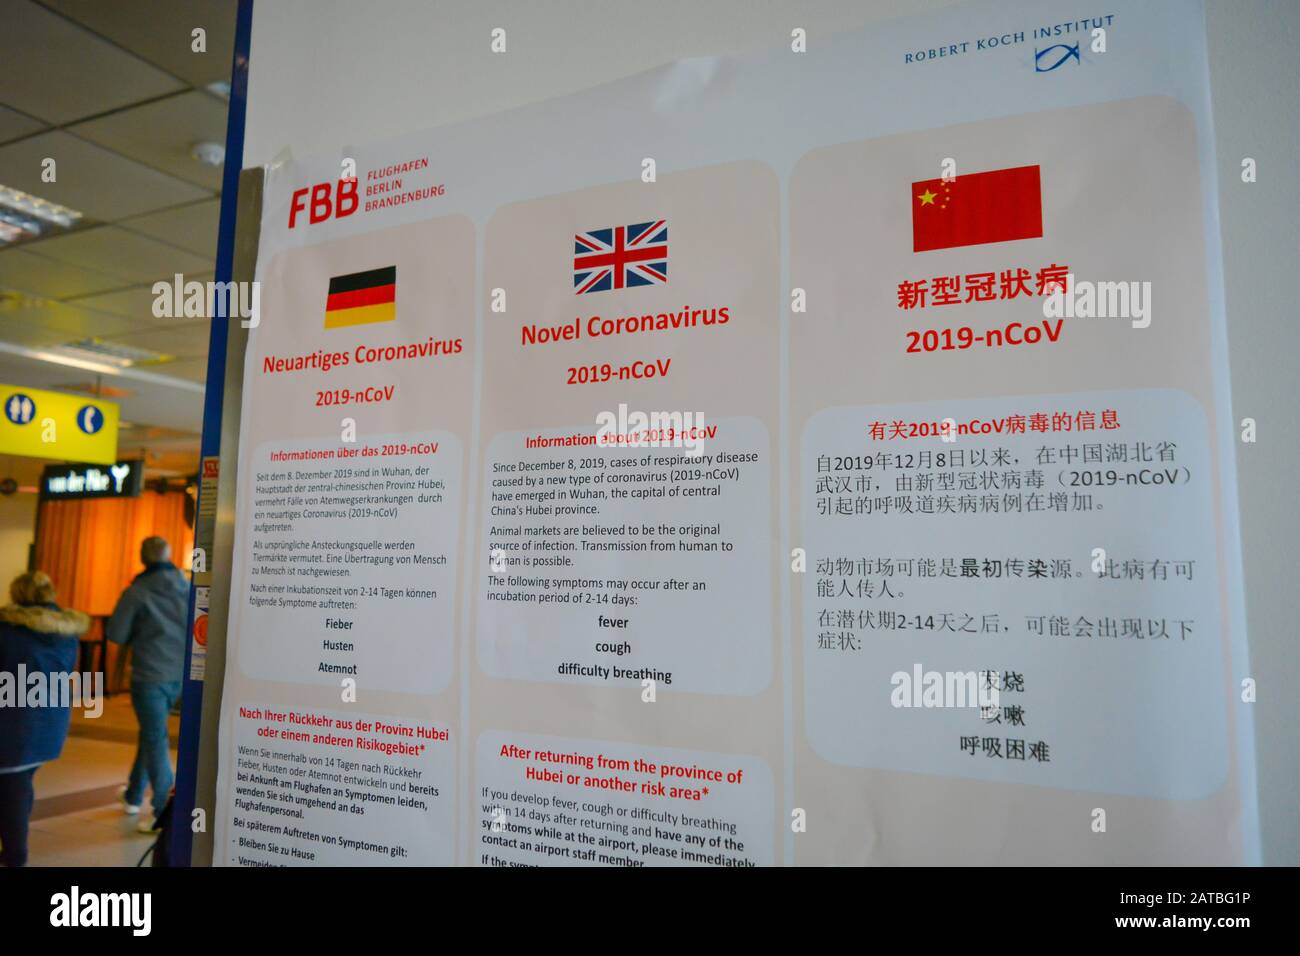 Berlin Schonefeld Airport SXF, Germany - 02/01/20: Warning sign advises about Coronavirus 2019-nCoV to all airport travellers. Written in German, English and Chinese language. Background with passengers in Berlin Airport Stock Photo